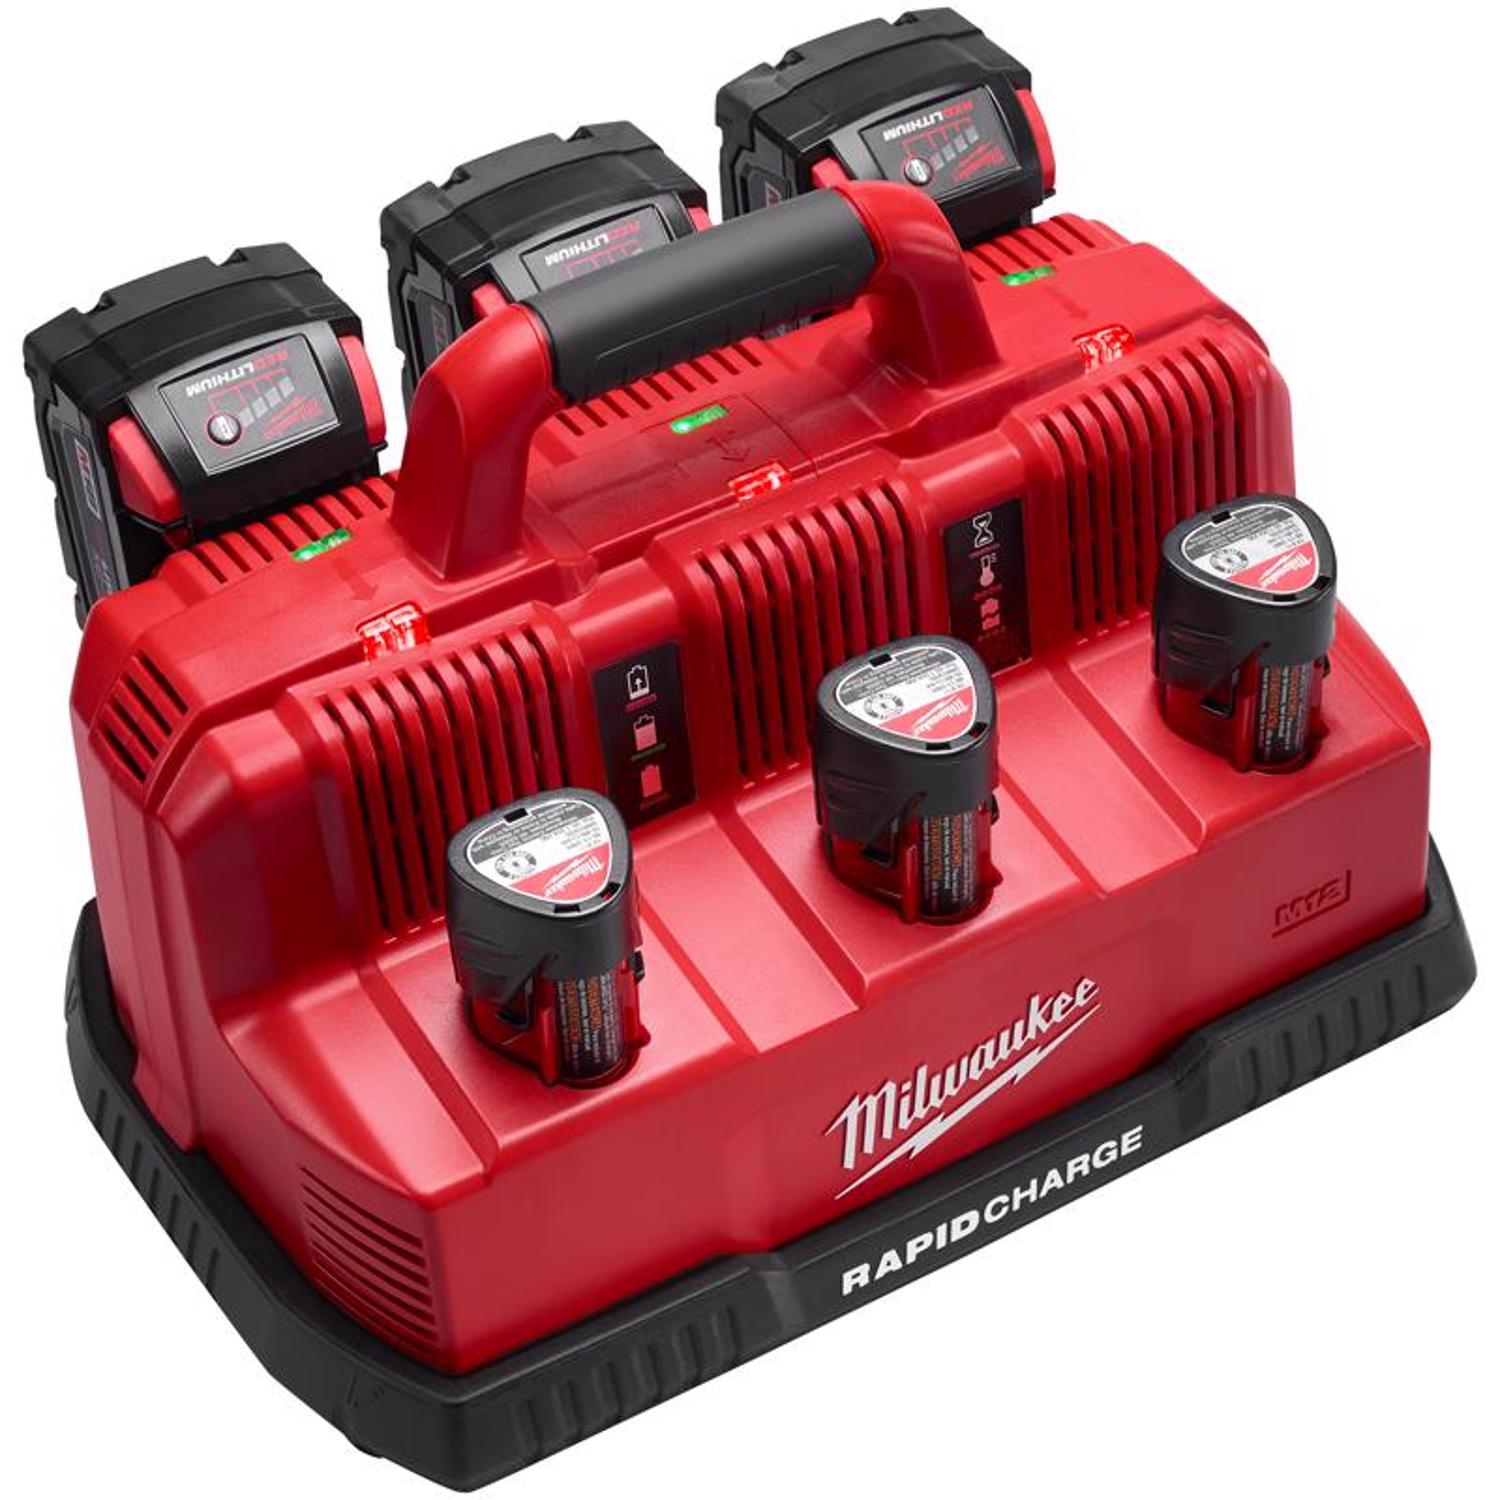 Photos - Battery Charger Milwaukee M18/M12 18/12 V 6-Port Rapid Charging Station 1 pc 48-59-1807 